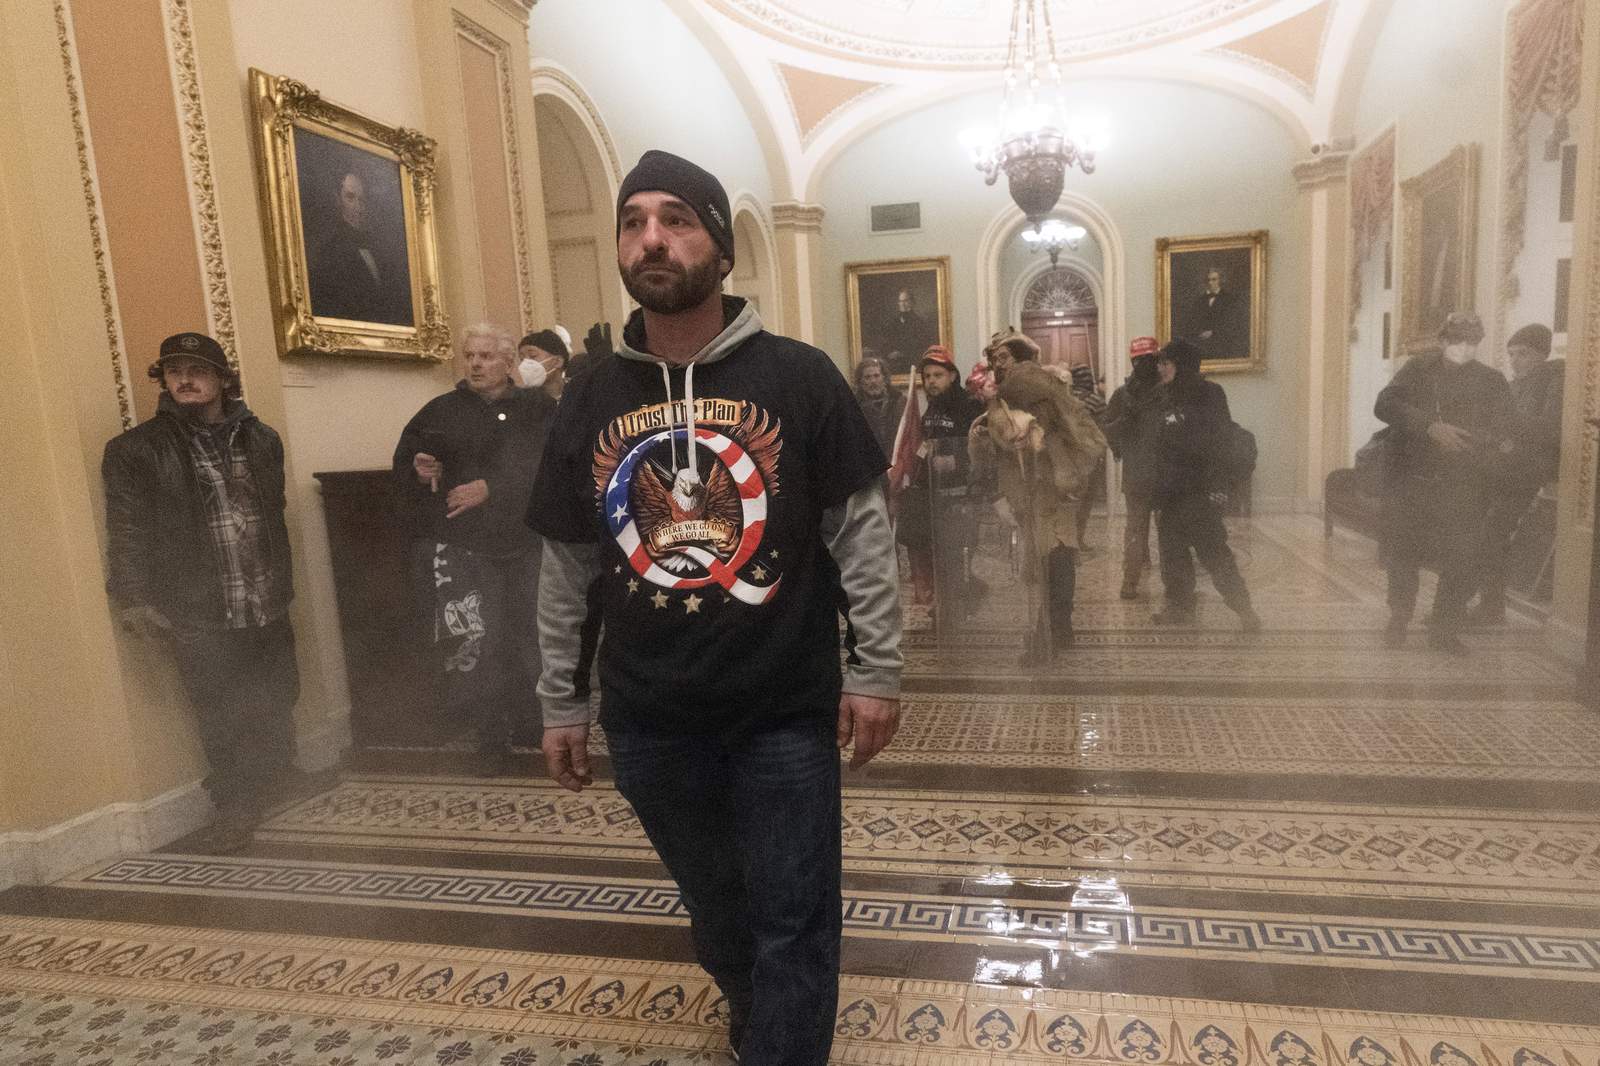 Social media users point out contrasting responses to storming of the U.S. Capitol in comparison to Black Lives Matter protests